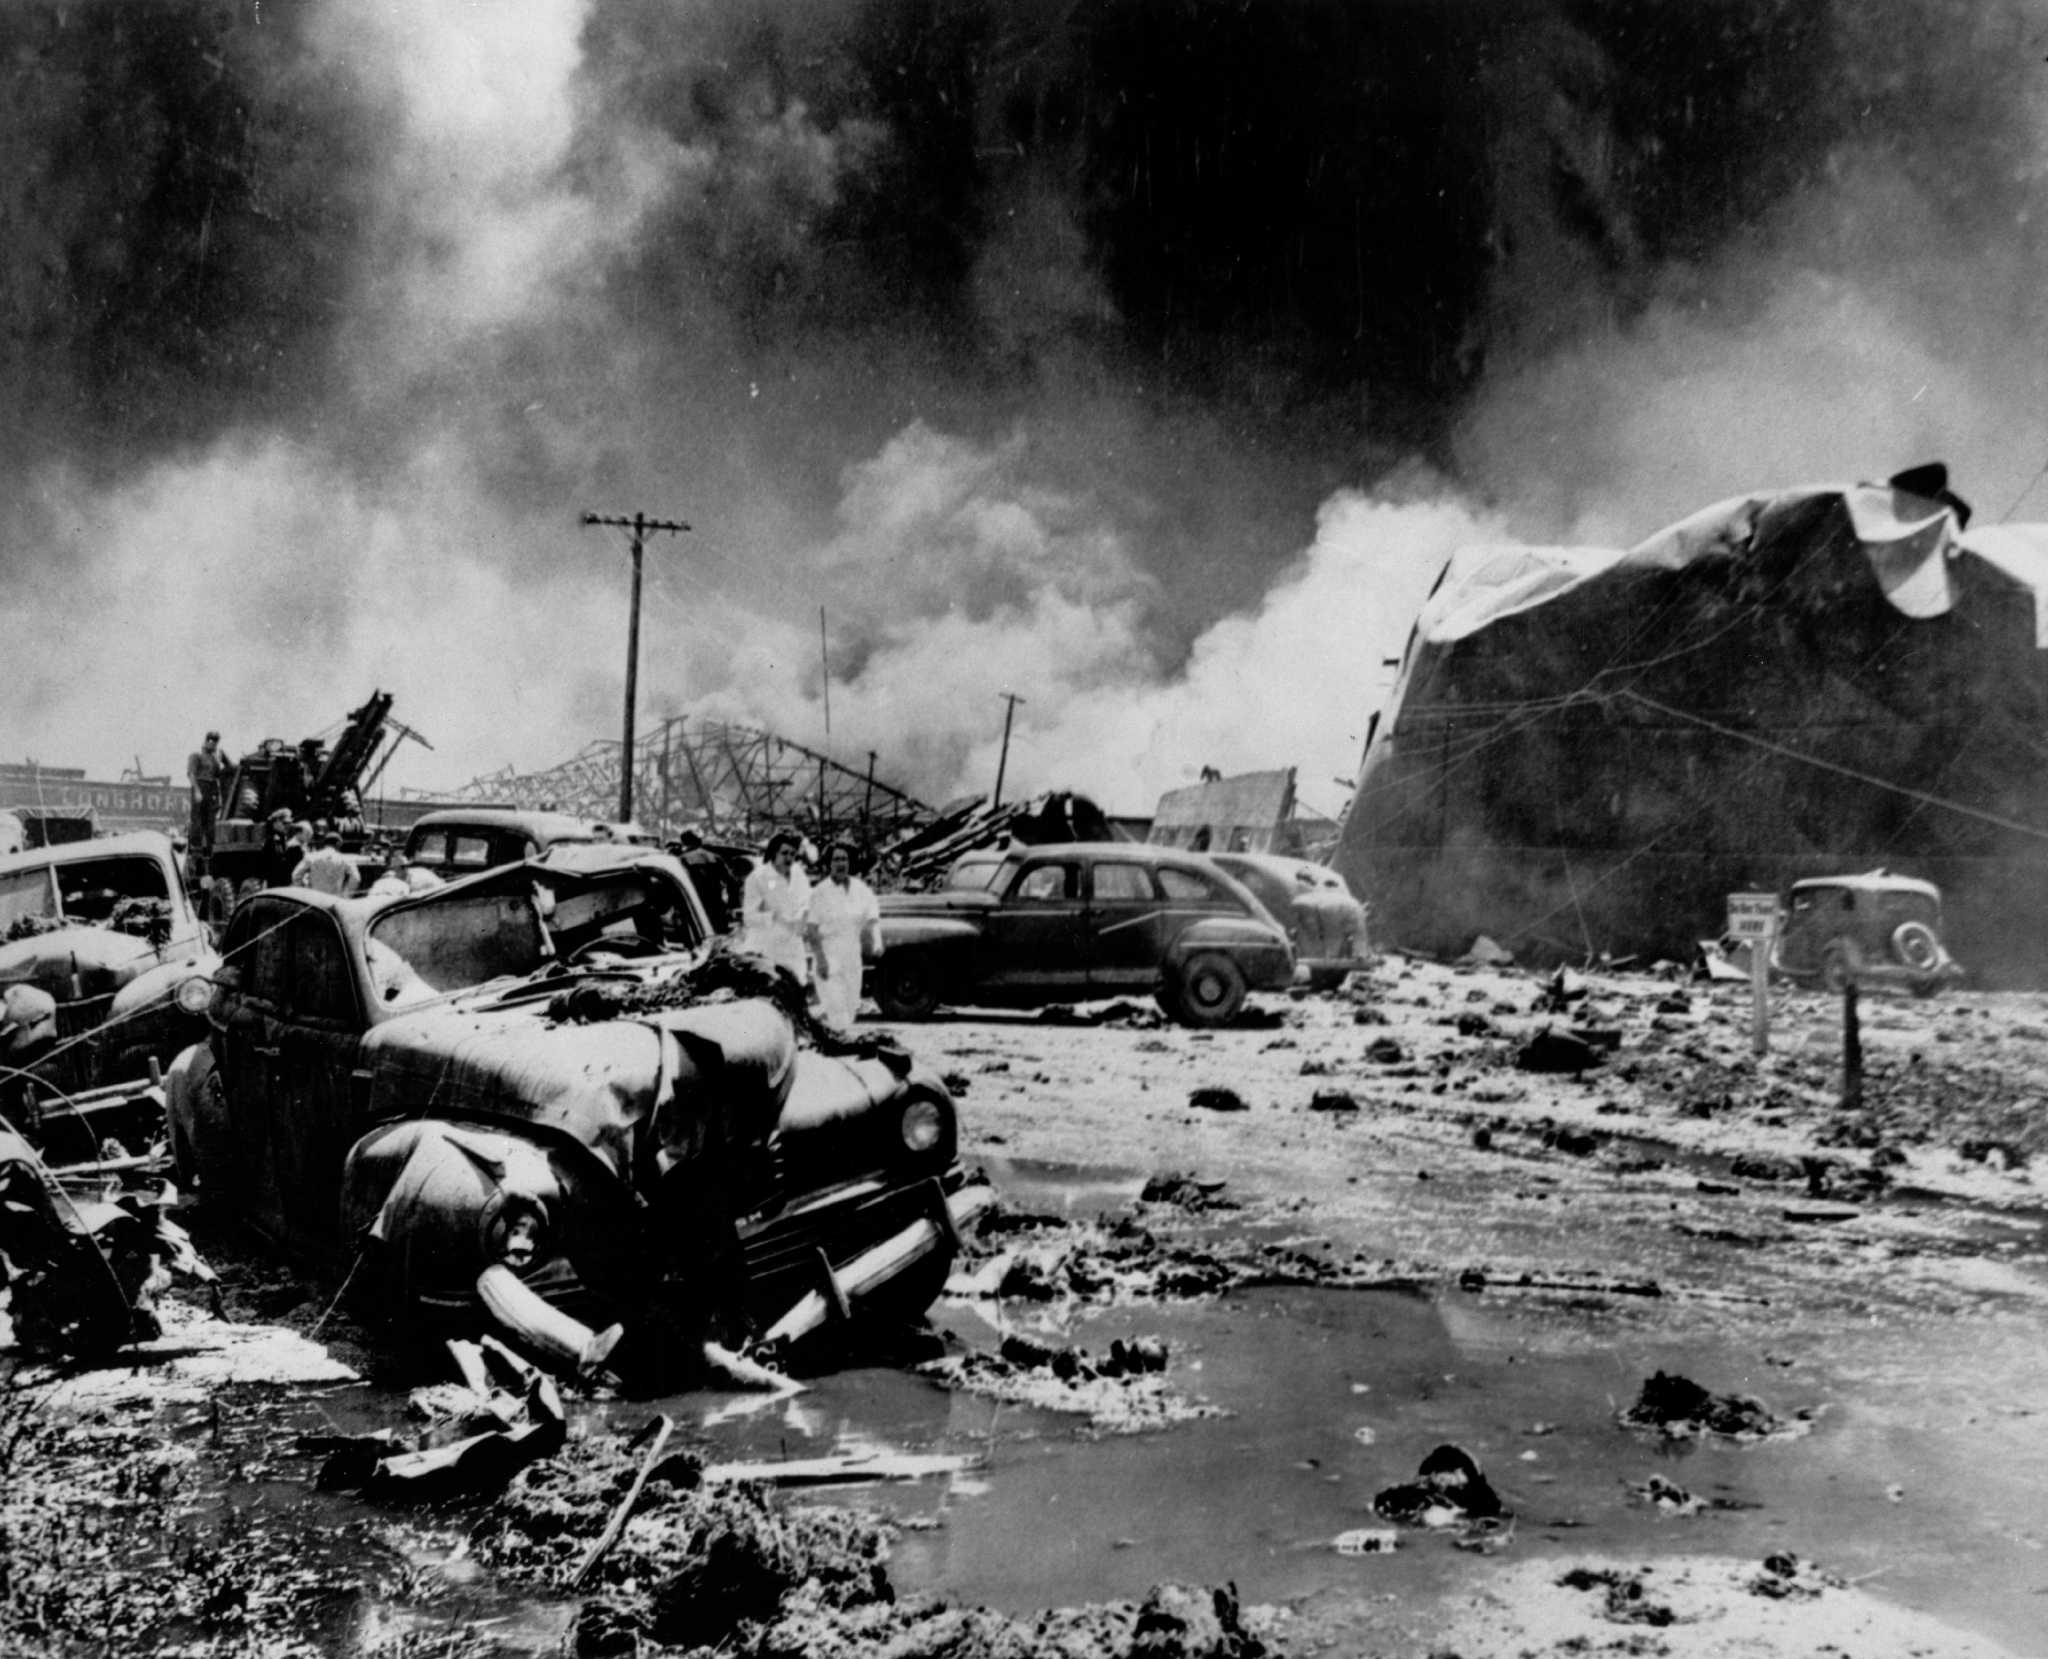 1947 Texas City Disaster Pics, Photography Collection